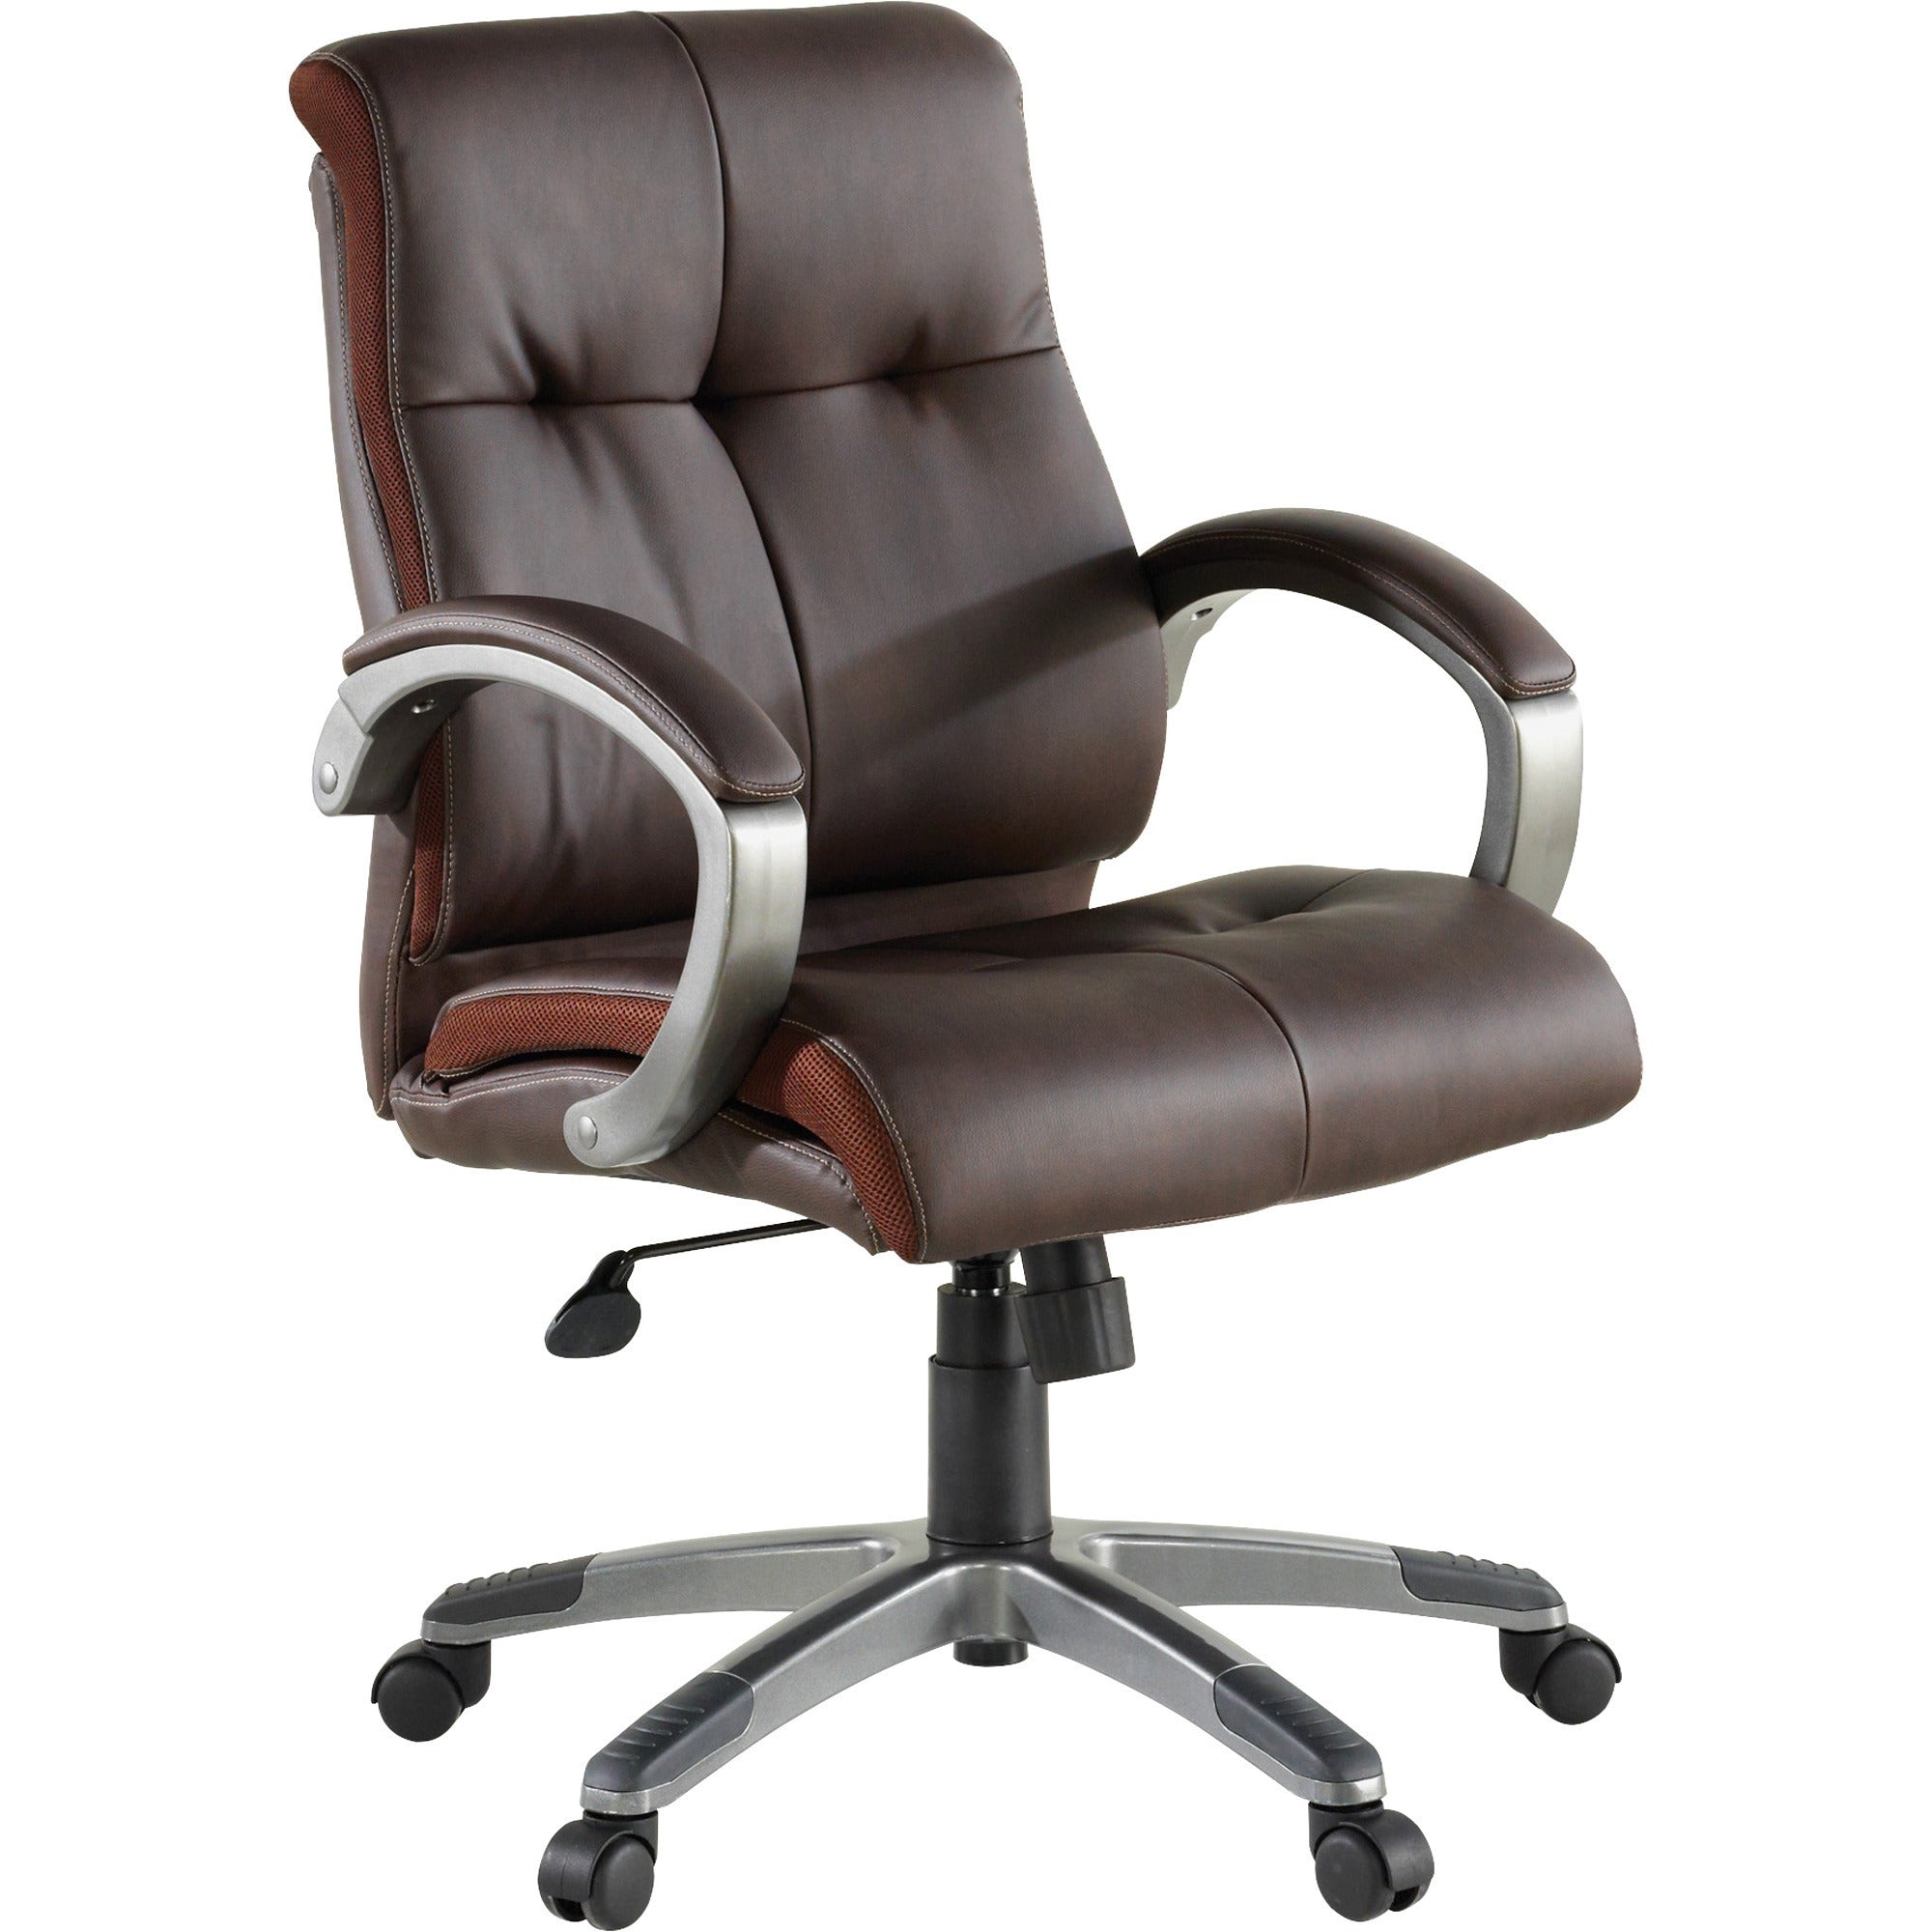 Lorell Low-back Executive Office Chair - Brown Leather Seat - 5-star Base - Brown - 1 Each - 